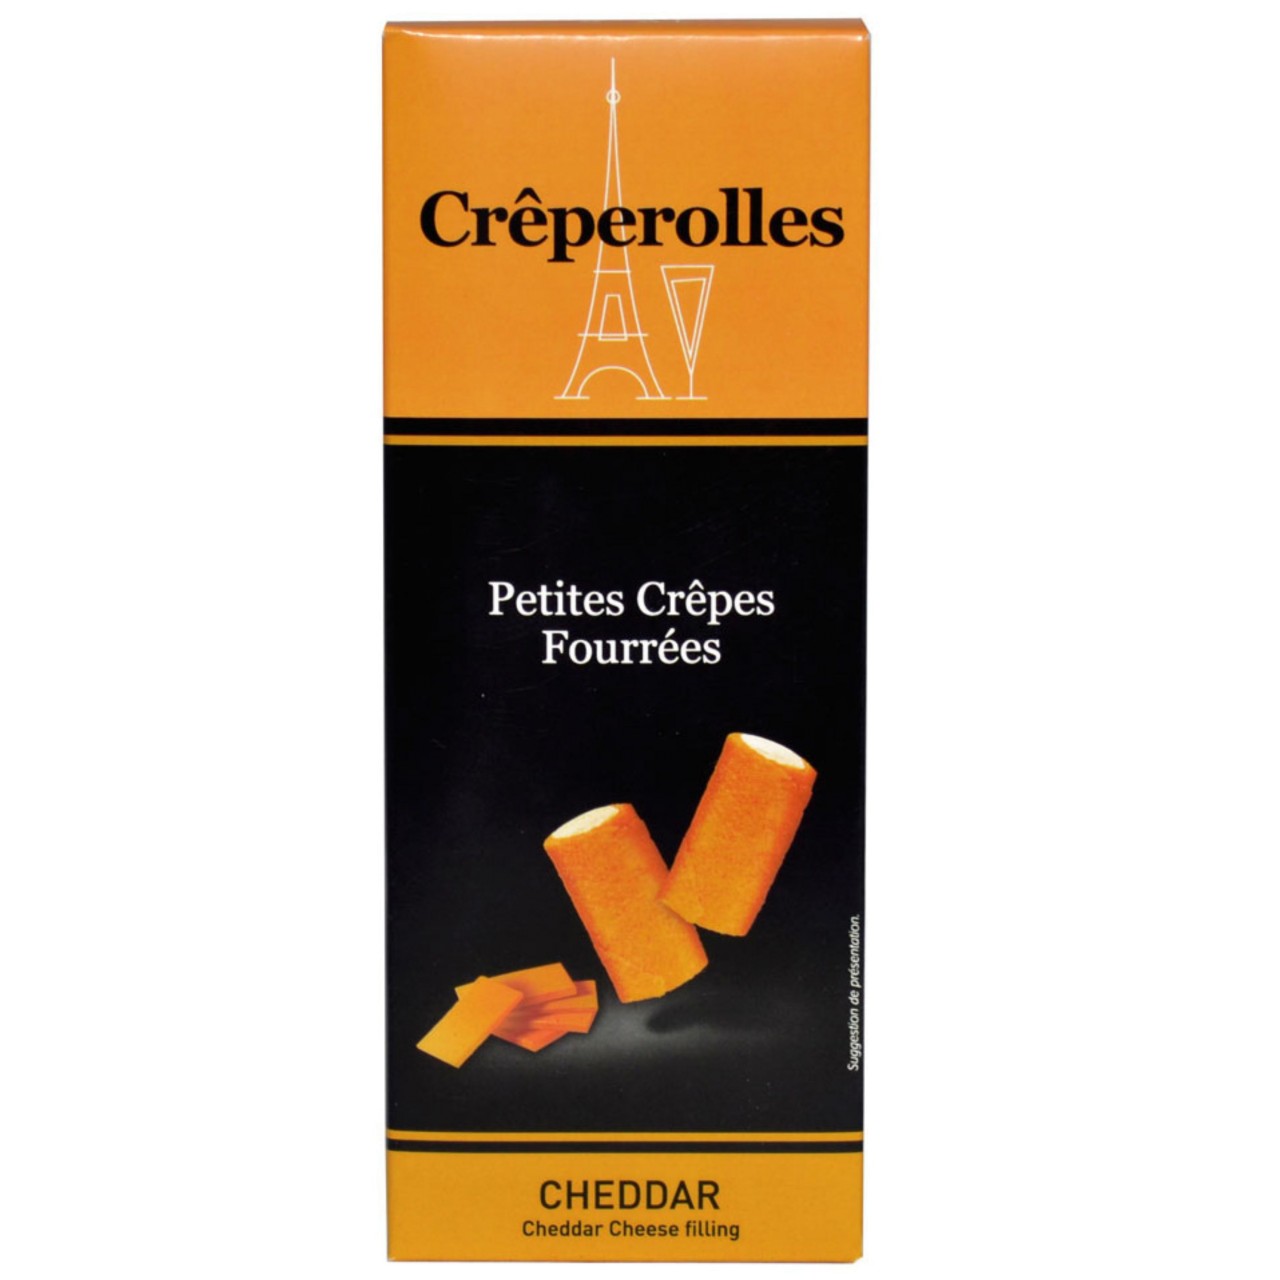 Creperolles Cheddar Petites Crepes Fourrees | MHD 07.11.24